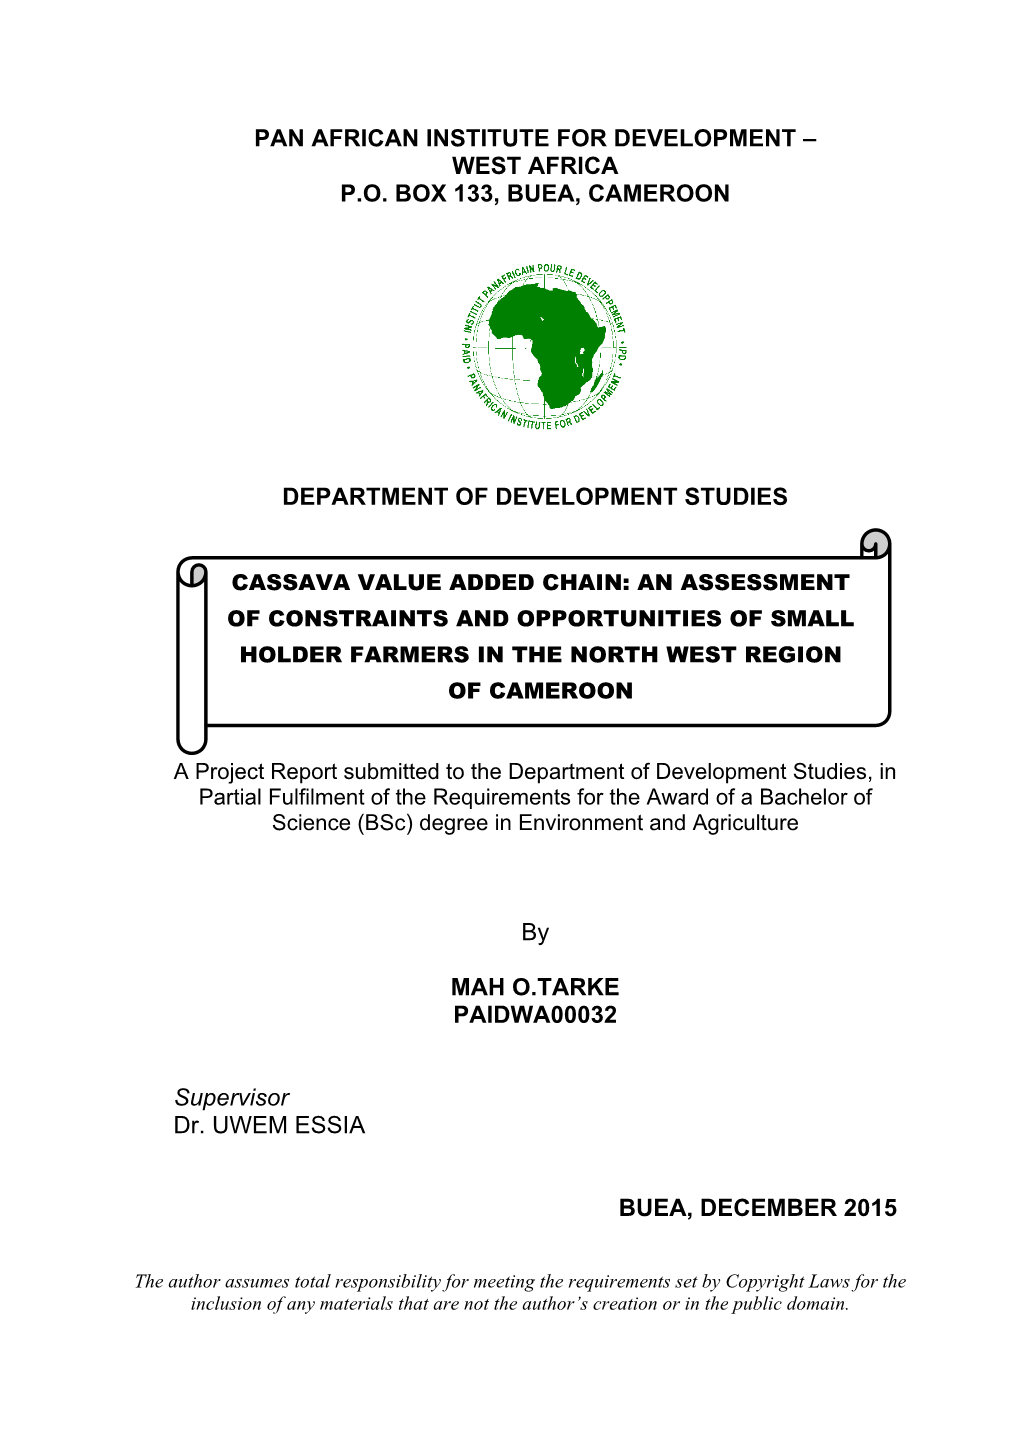 Cassava Value Added Chain: an Assessment of Constraints and Opportunities of Small Holder Farmers in the North West Region of Cameroon